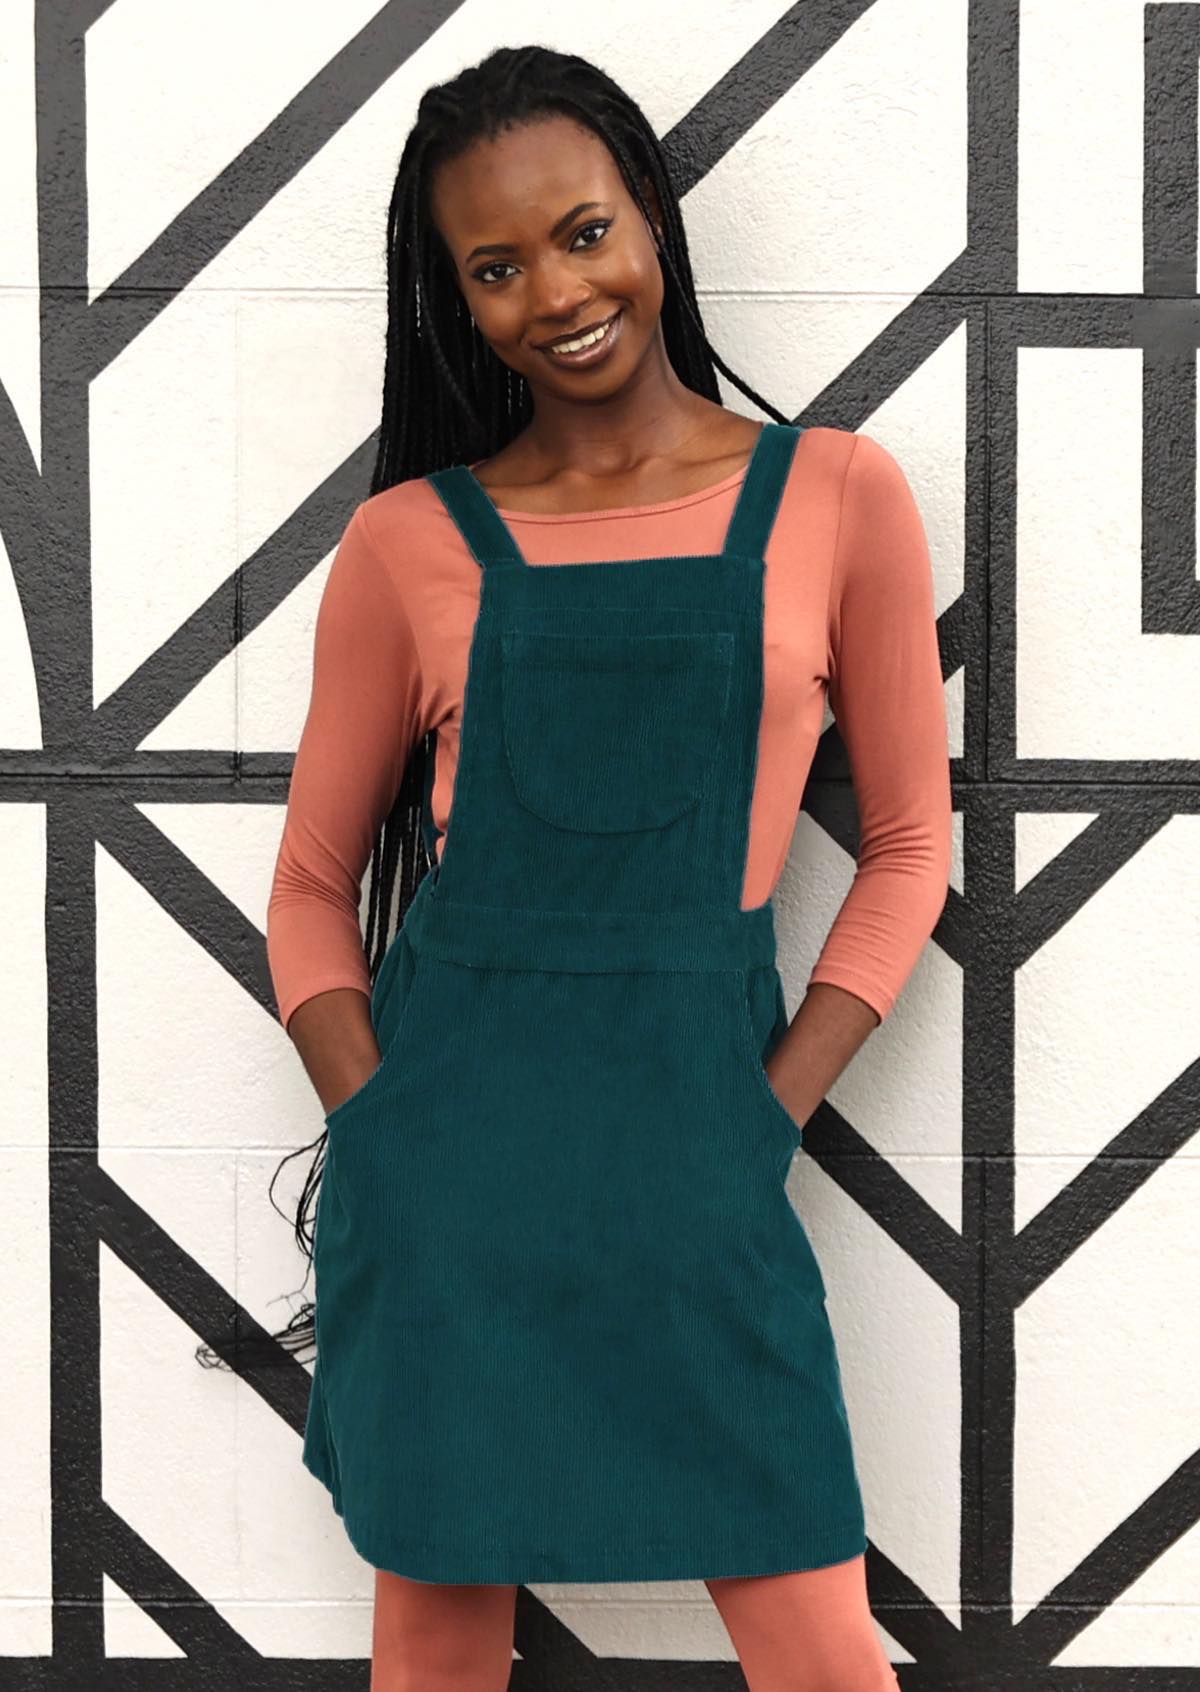 woman wearing teal corduroy pinafore over pink top